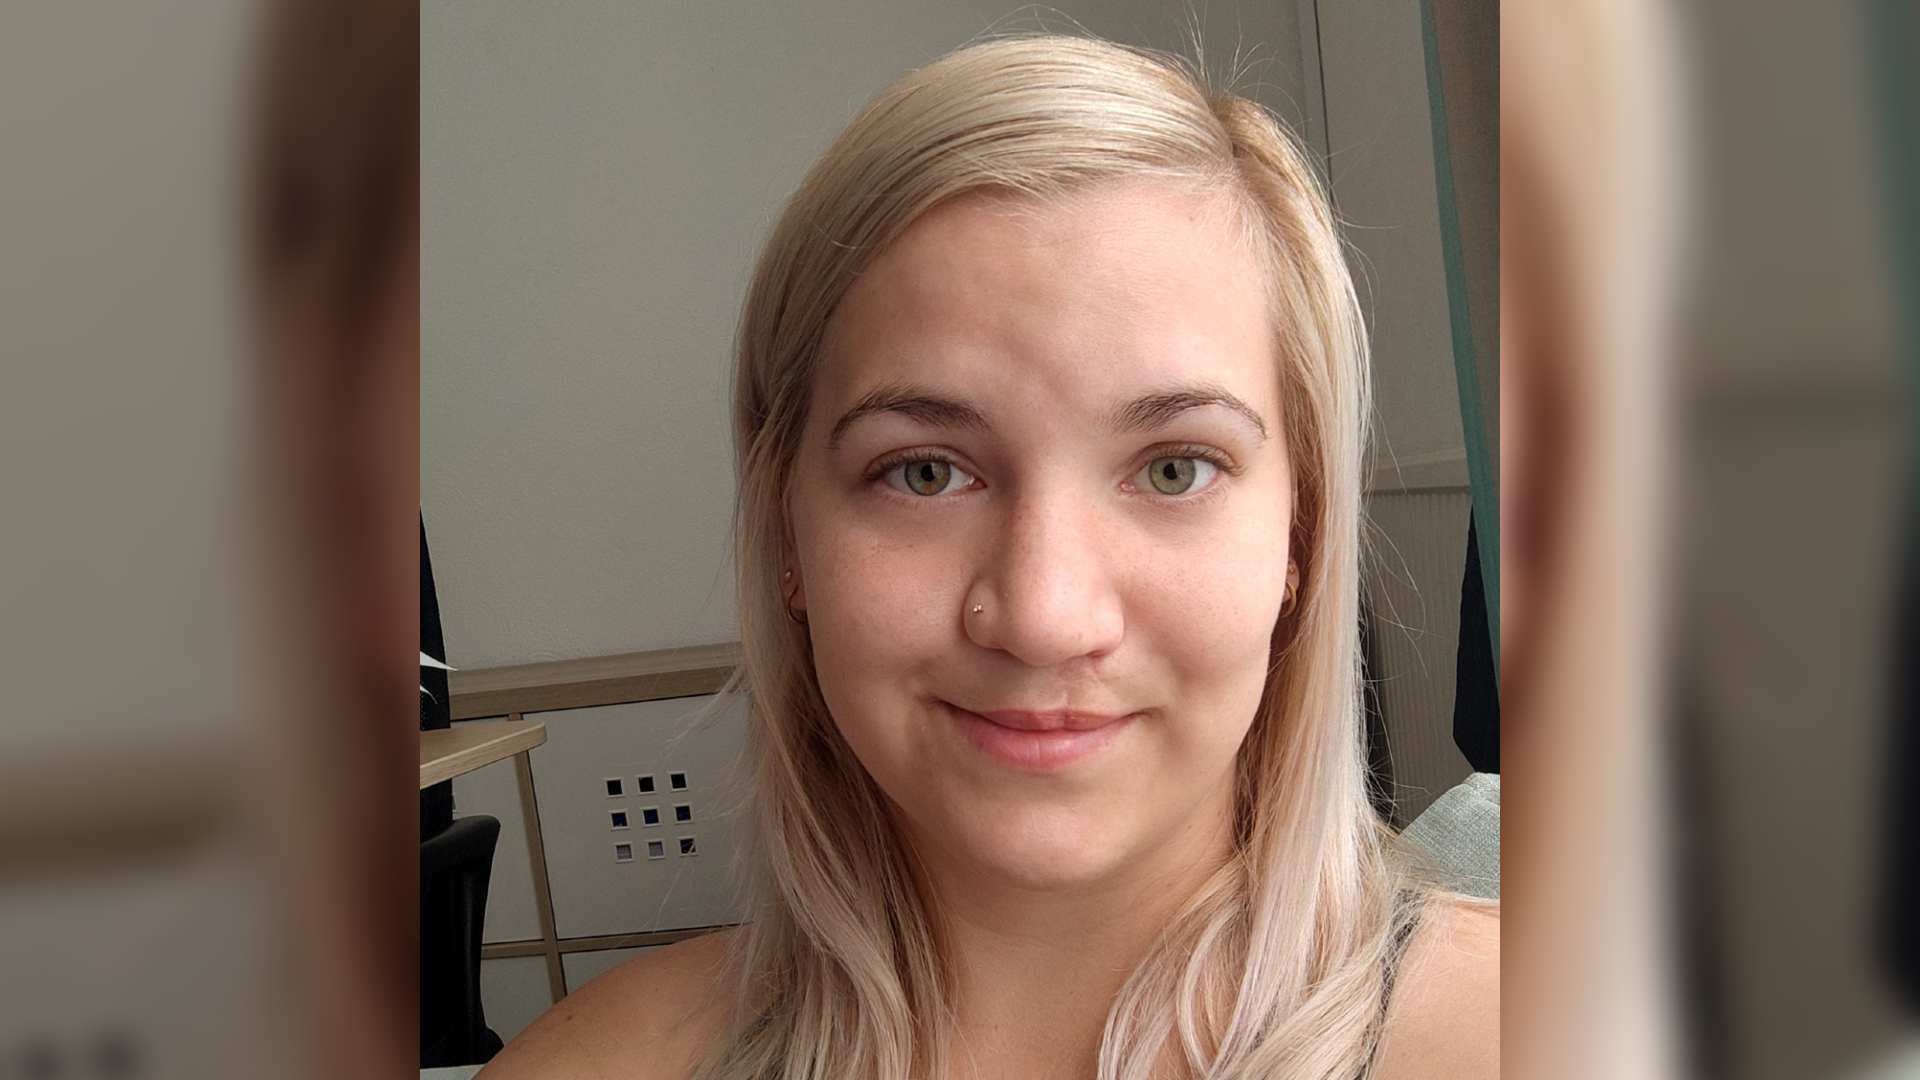 A blonde woman with a cleft scar smiles in a selfie